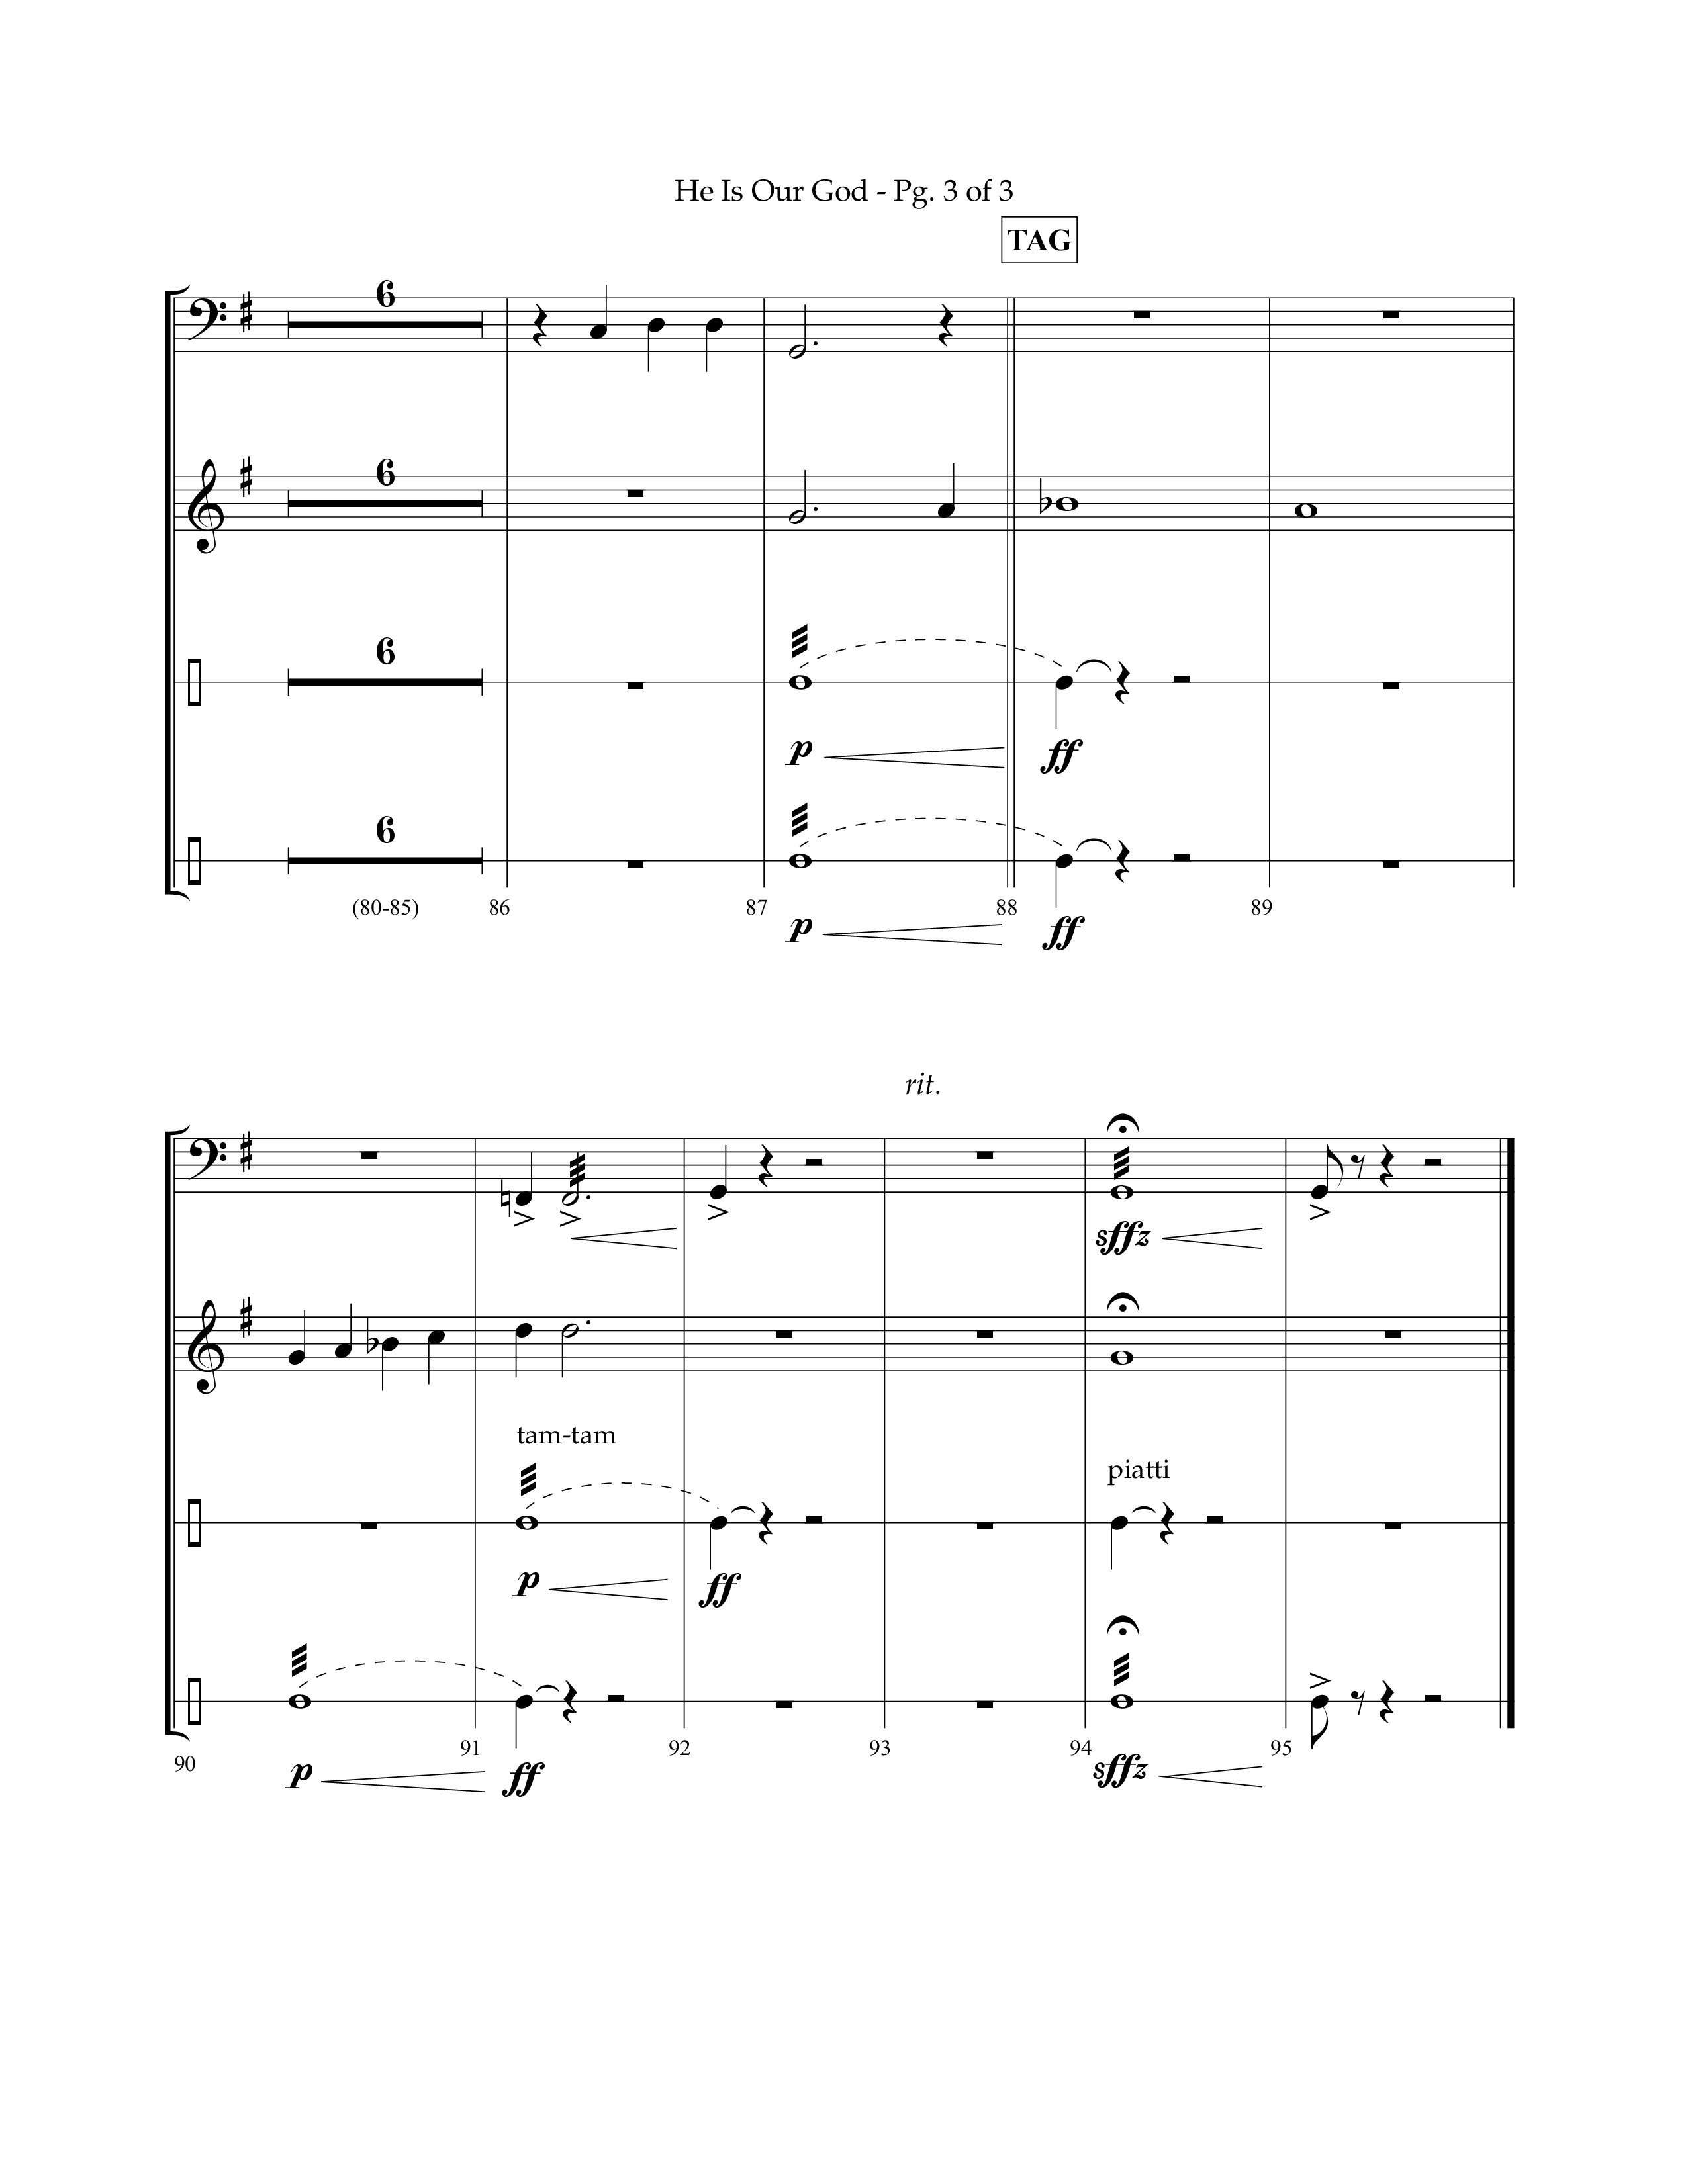 He Is Our God (Choral Anthem SATB) Percussion (Lifeway Choral / Arr. John Bolin / Arr. Don Koch / Arr. Eric Belvin / Orch. Phillip Keveren)